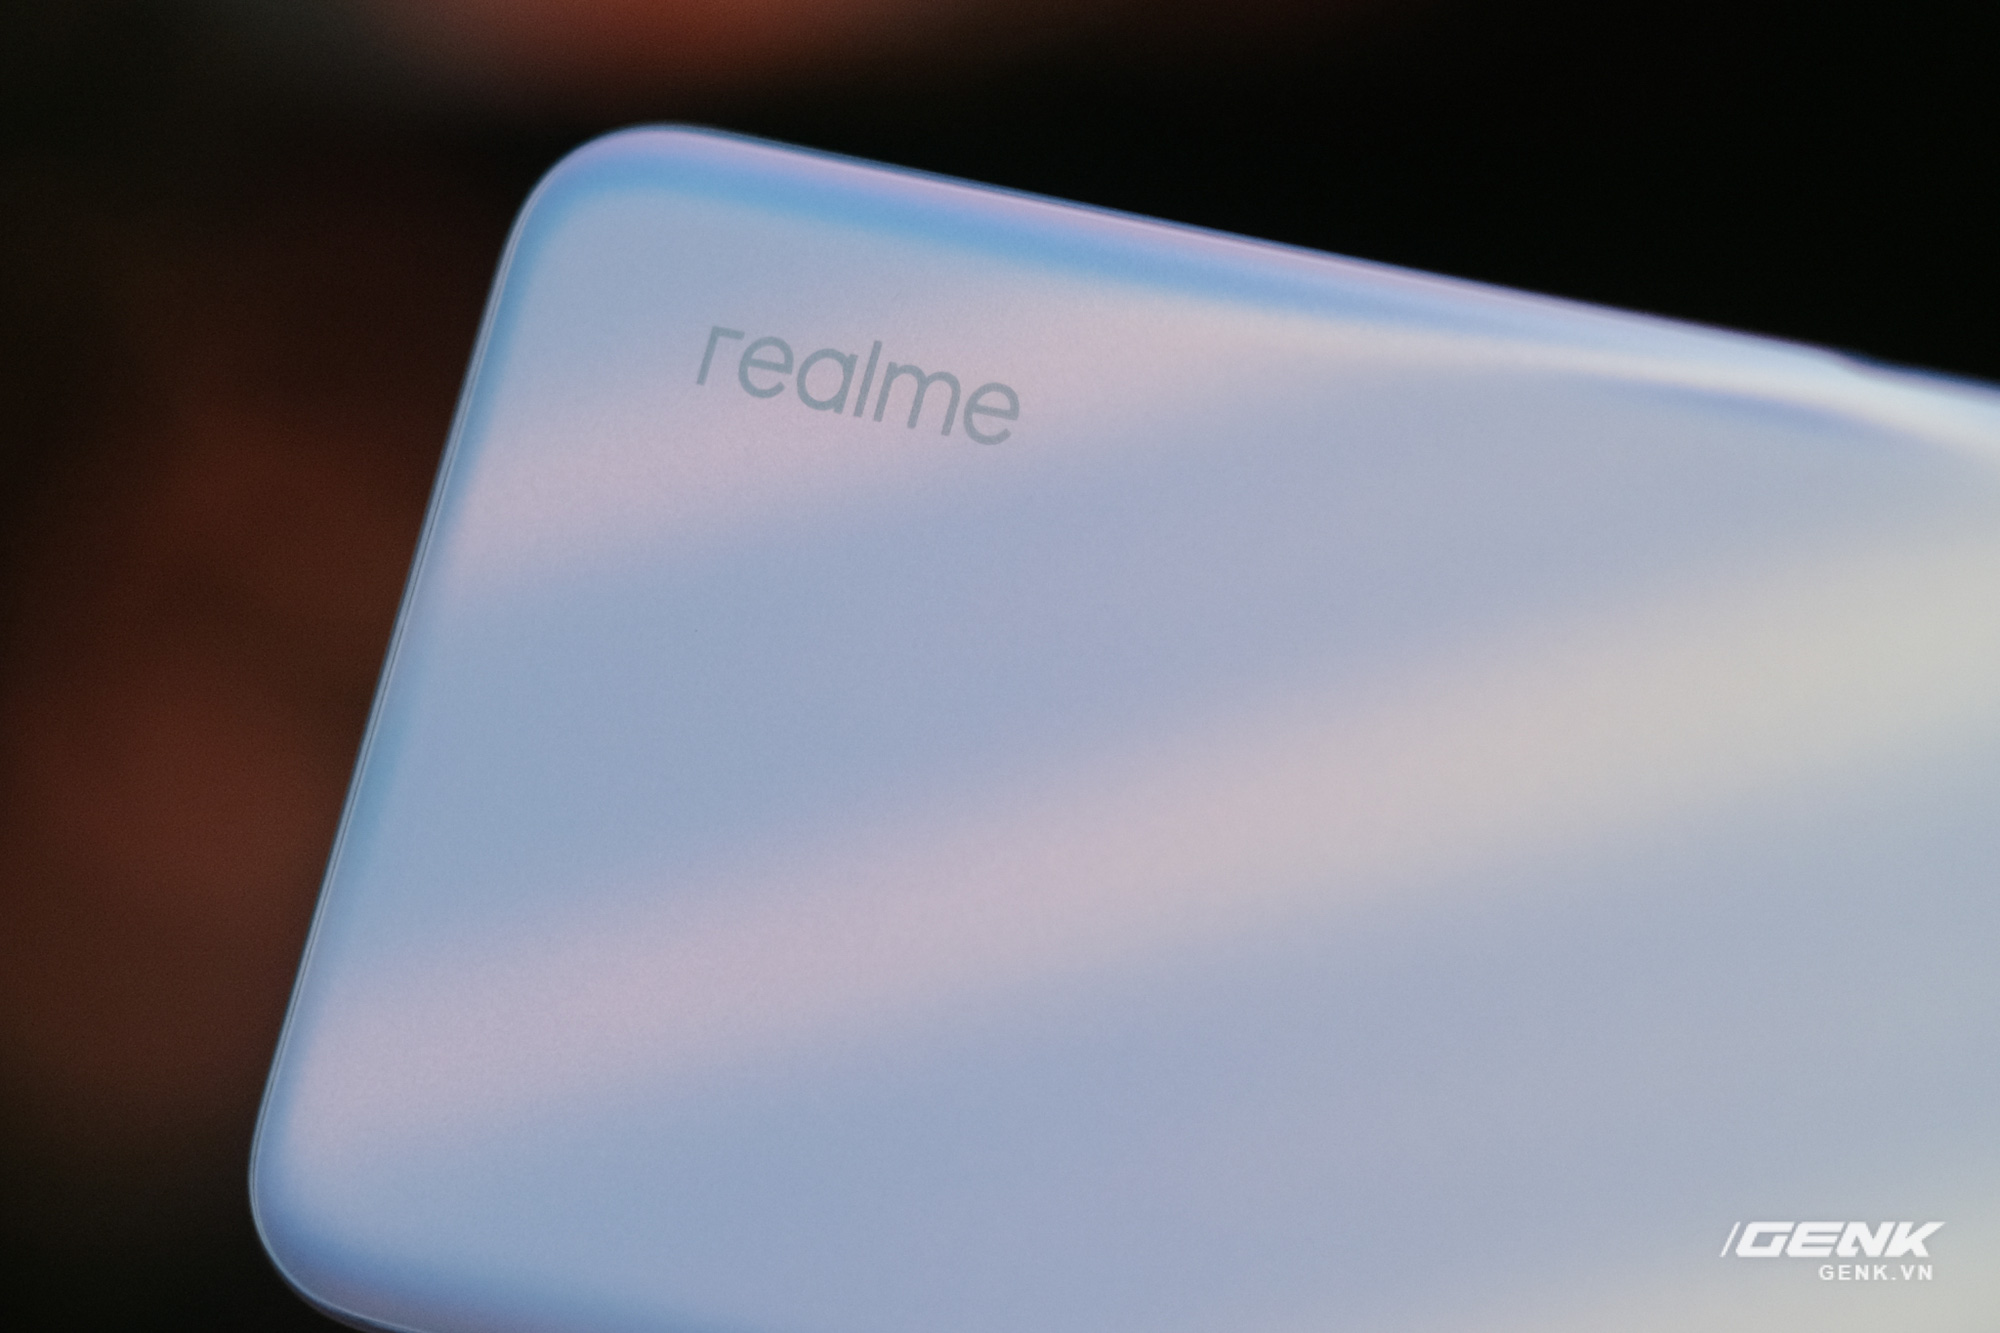 On hand realme Q3s: Smartphone priced under 6 million has a 144Hz screen, the configuration of the device is 10 million - Photo 7.